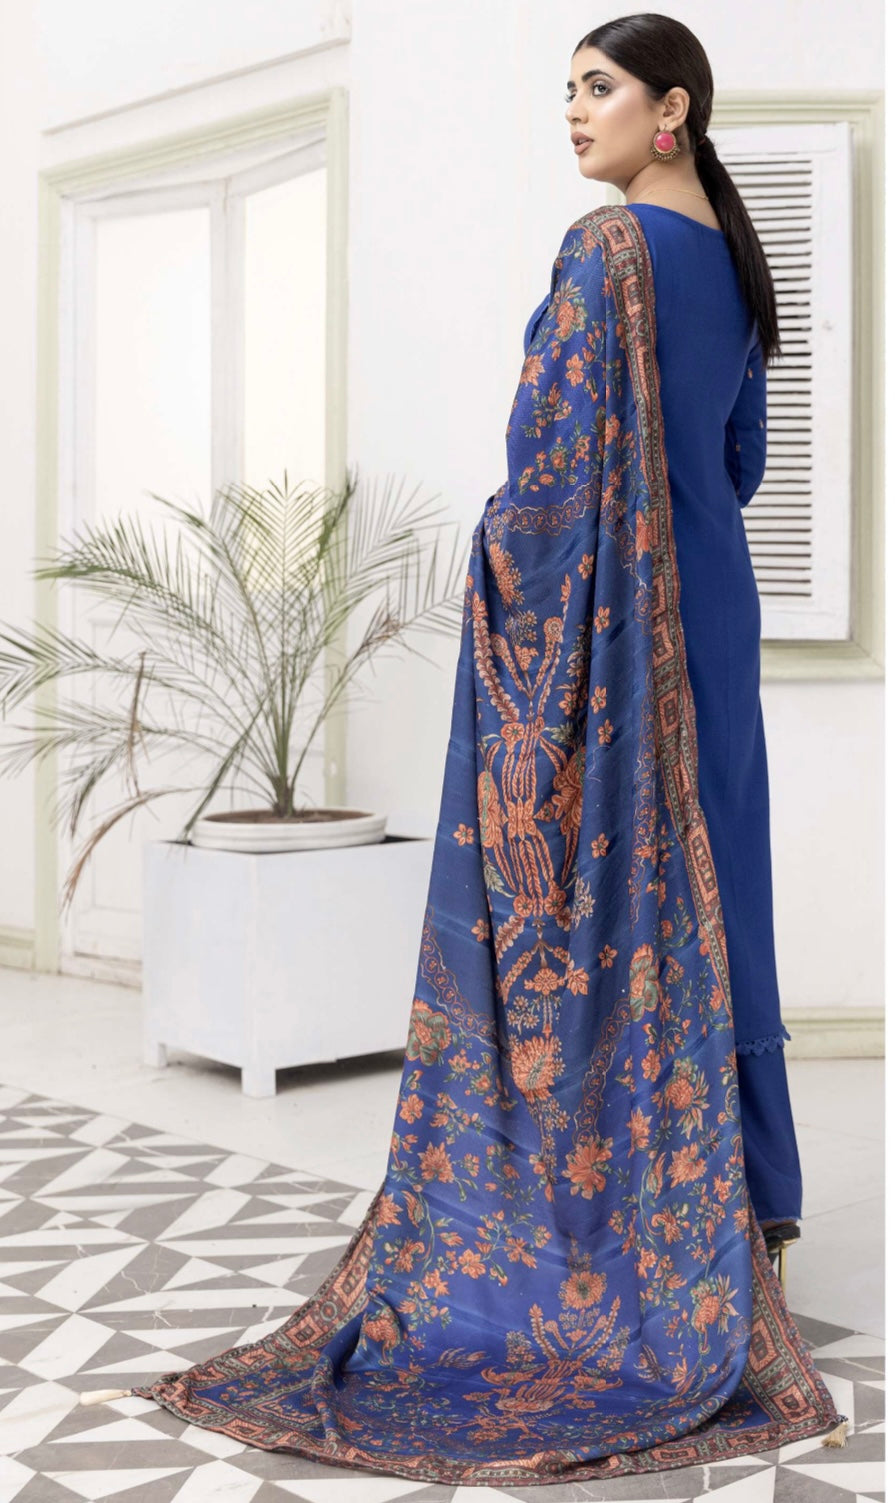 SIMRANS MAHI Dhanak Embroidered 3 Piece Winter Outfit With Shawl MSH02